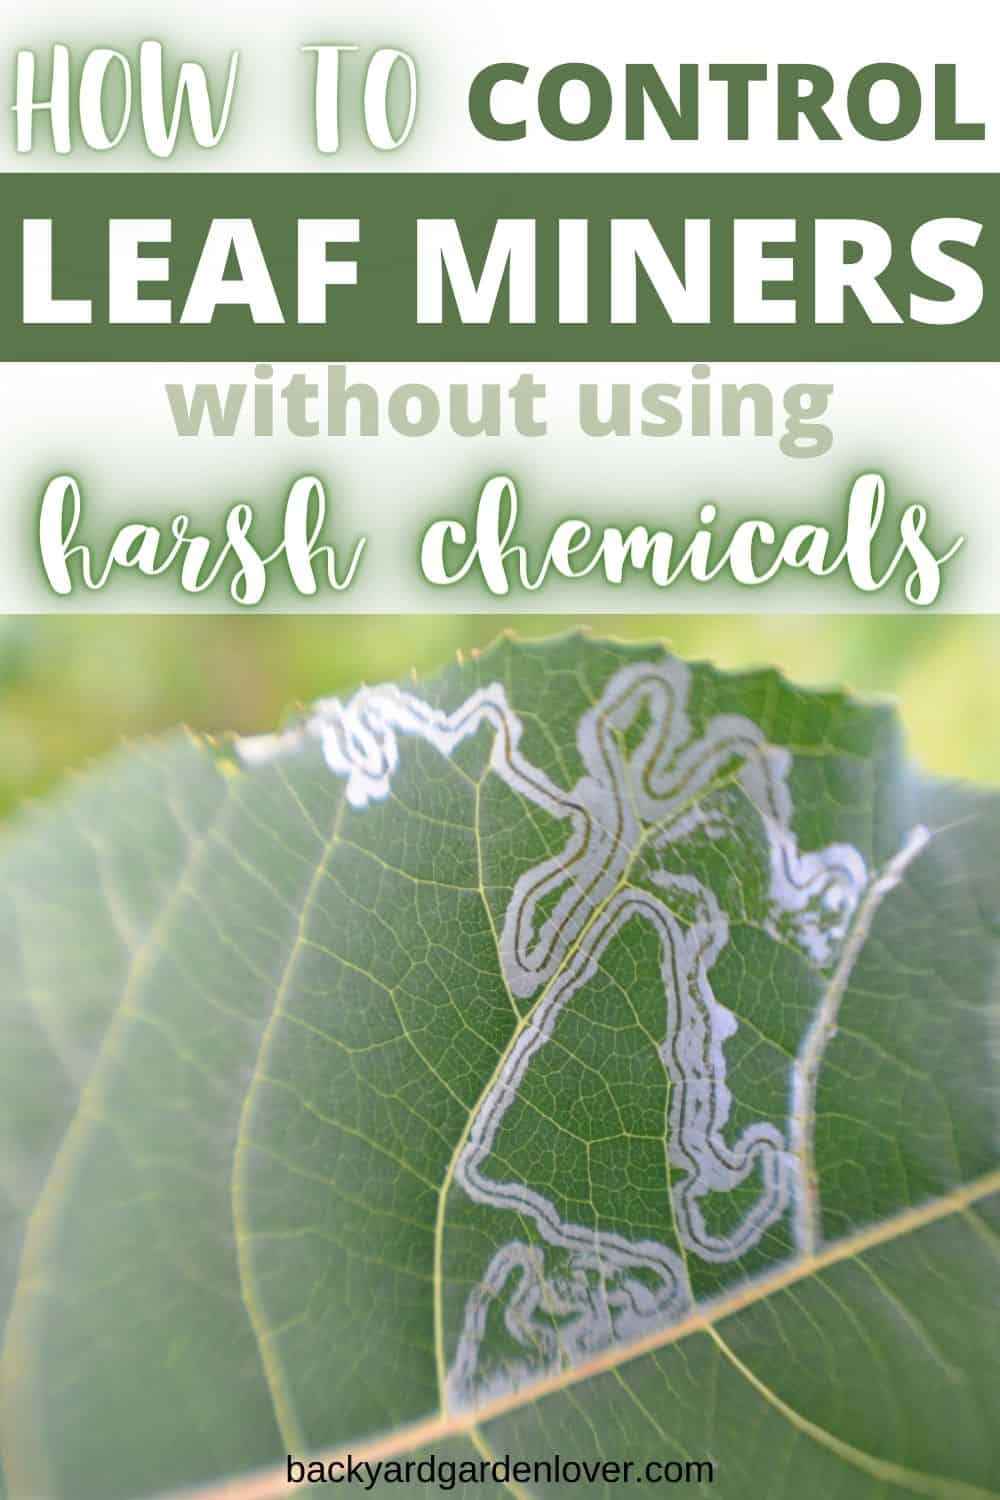 How to control leaf miners - Pinterest image